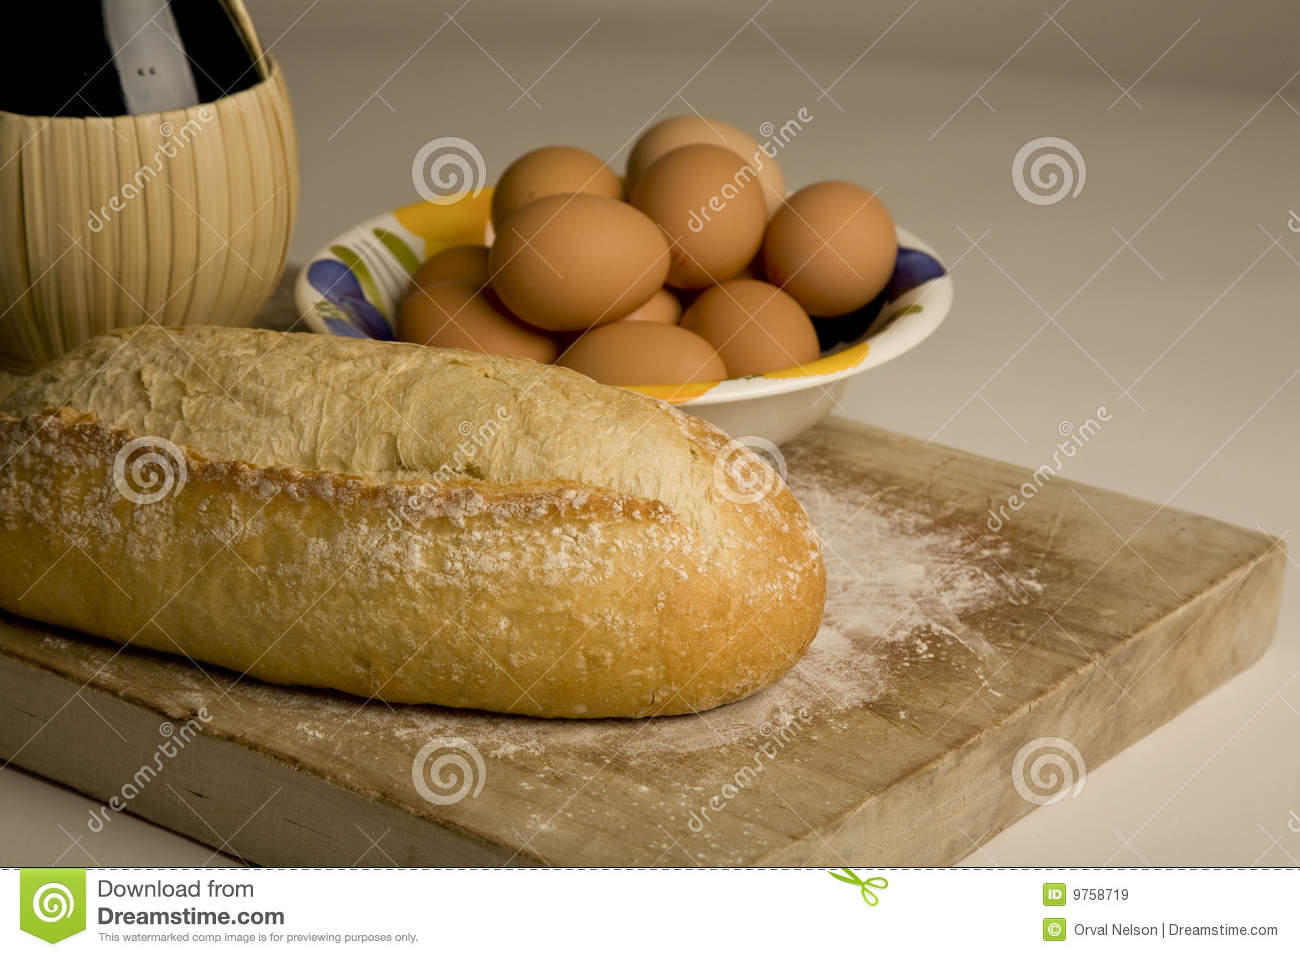 Artisan Bread On Cutting Board  Royalty Free Stock Images   Image